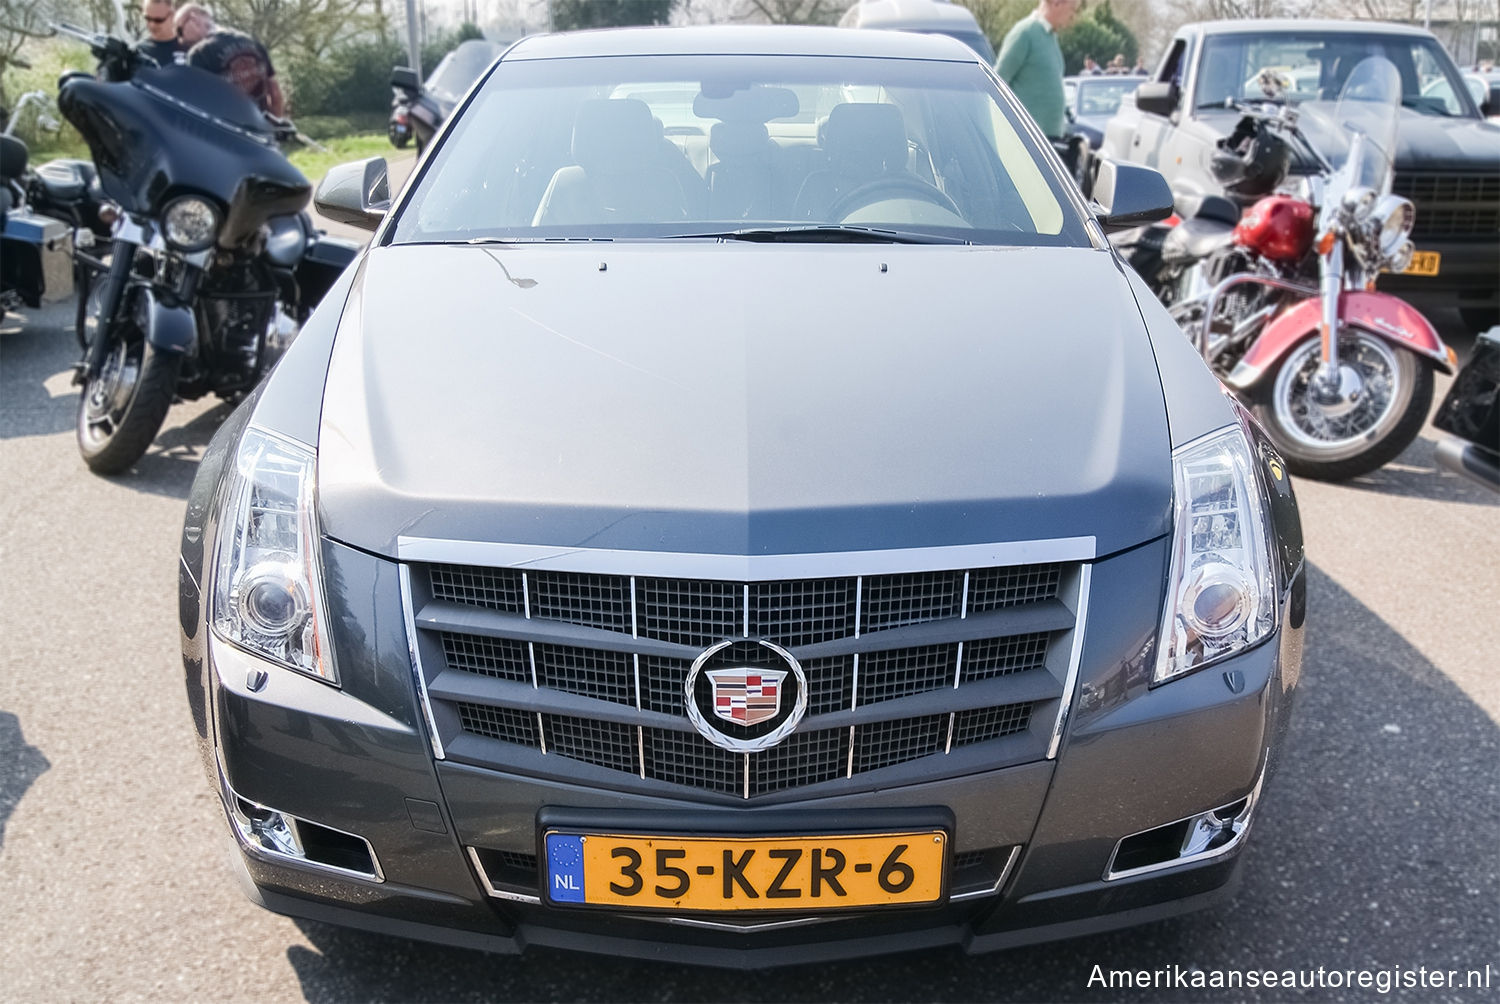 Cadillac CTS uit 2008